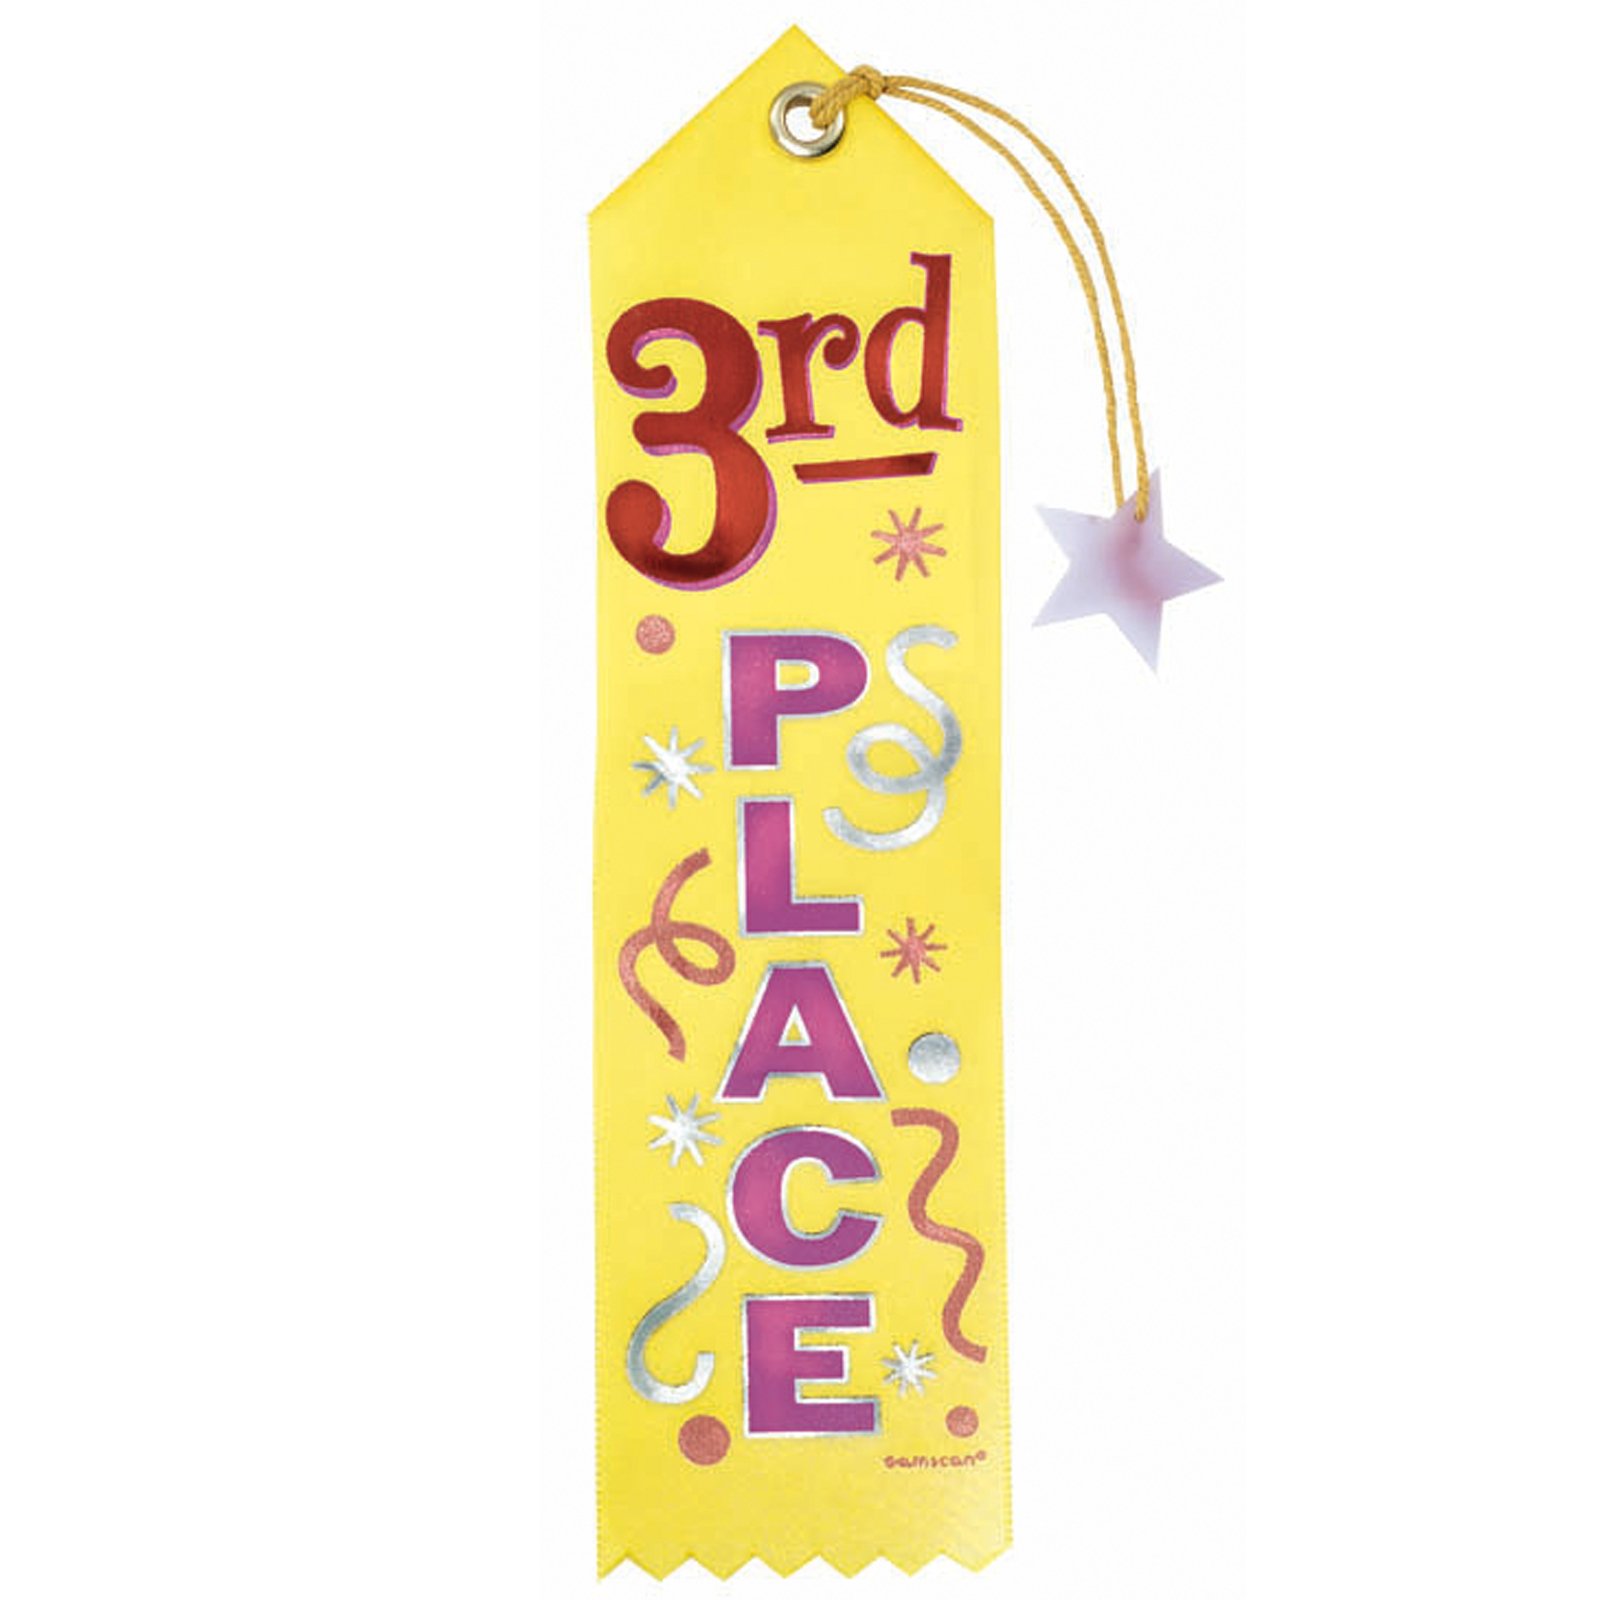 Photos   2nd Place Ribbon Clipart Qacps K12 Md Us Ces Clipart Carson